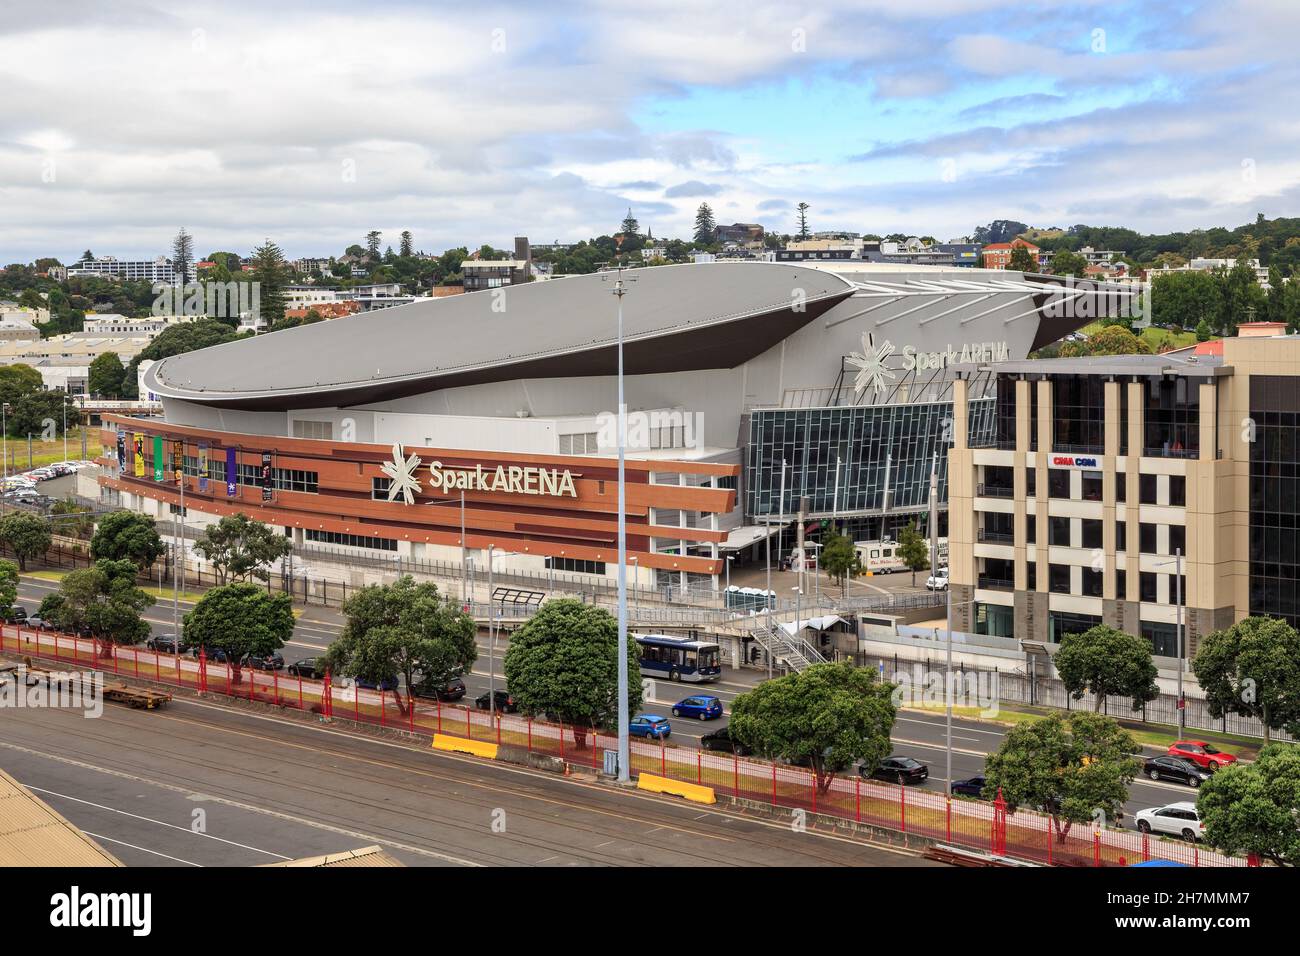 The Spark Arena, a 12,000 seat sport and entertainment venue in Auckland, New Zealand Stock Photo